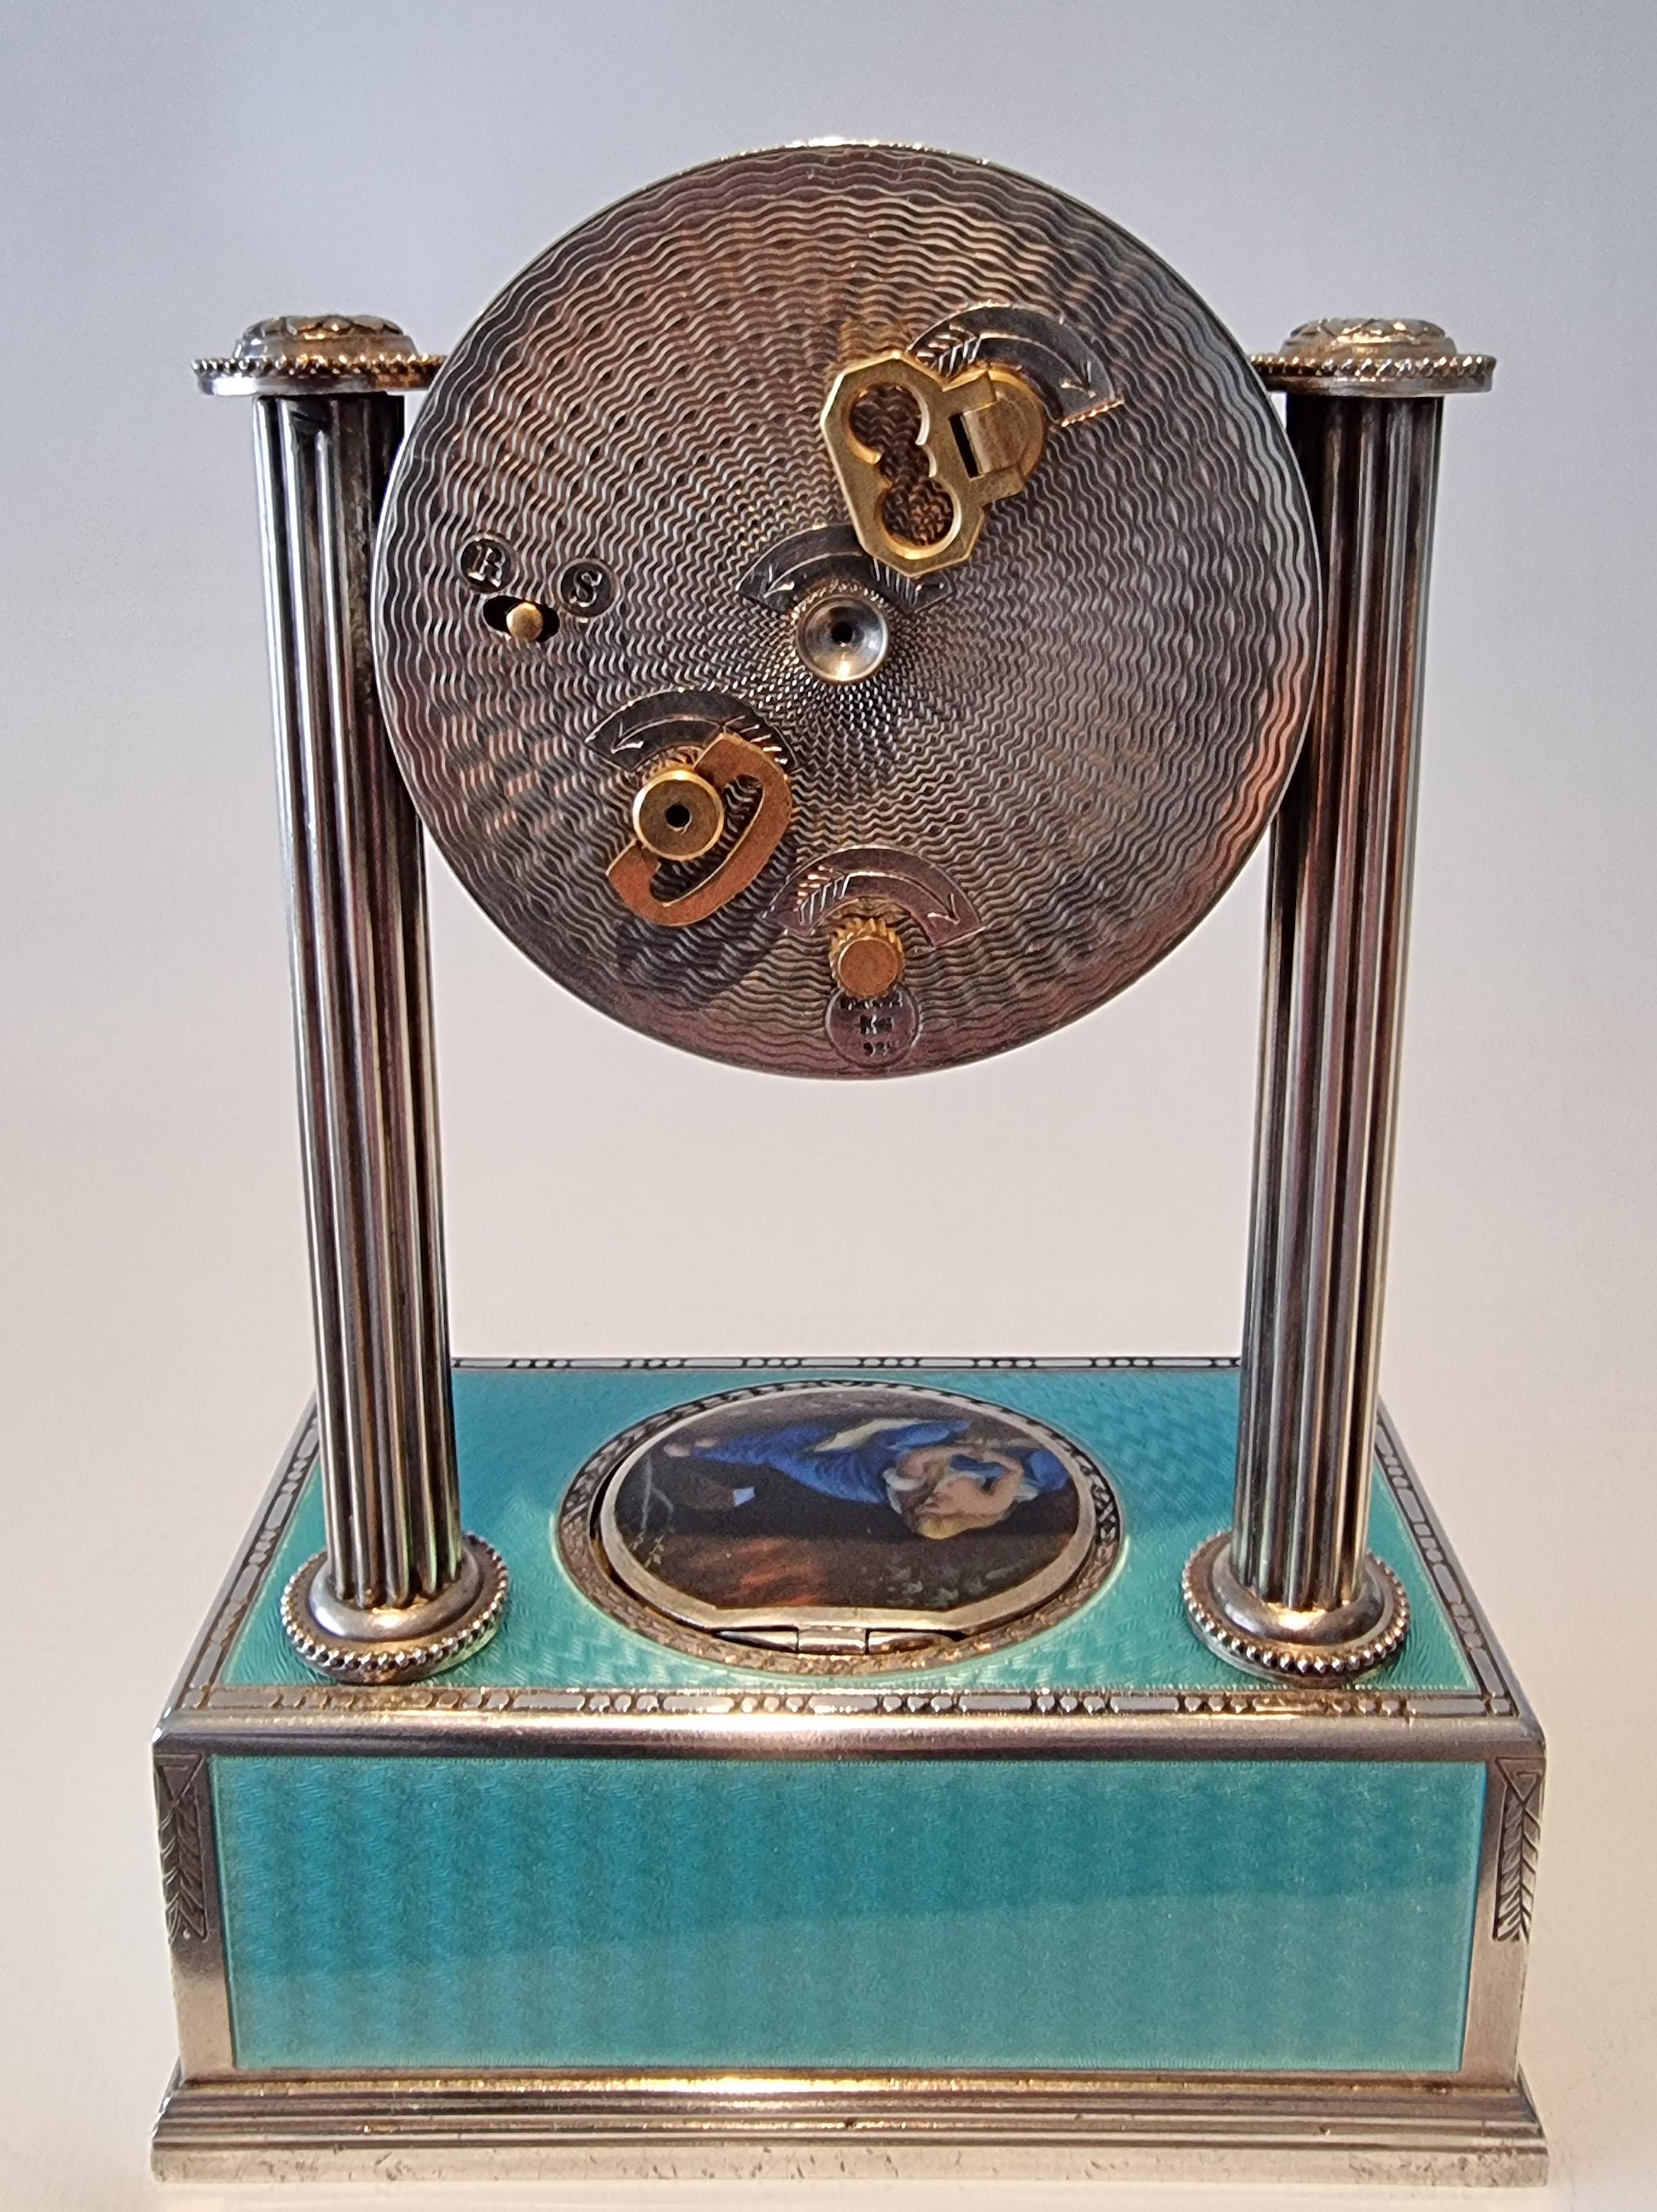 Early 20th Century Silver-Gilt, Guilloche Turquoise Enamel Timepiece Alarm Clock Singing Bird For Sale